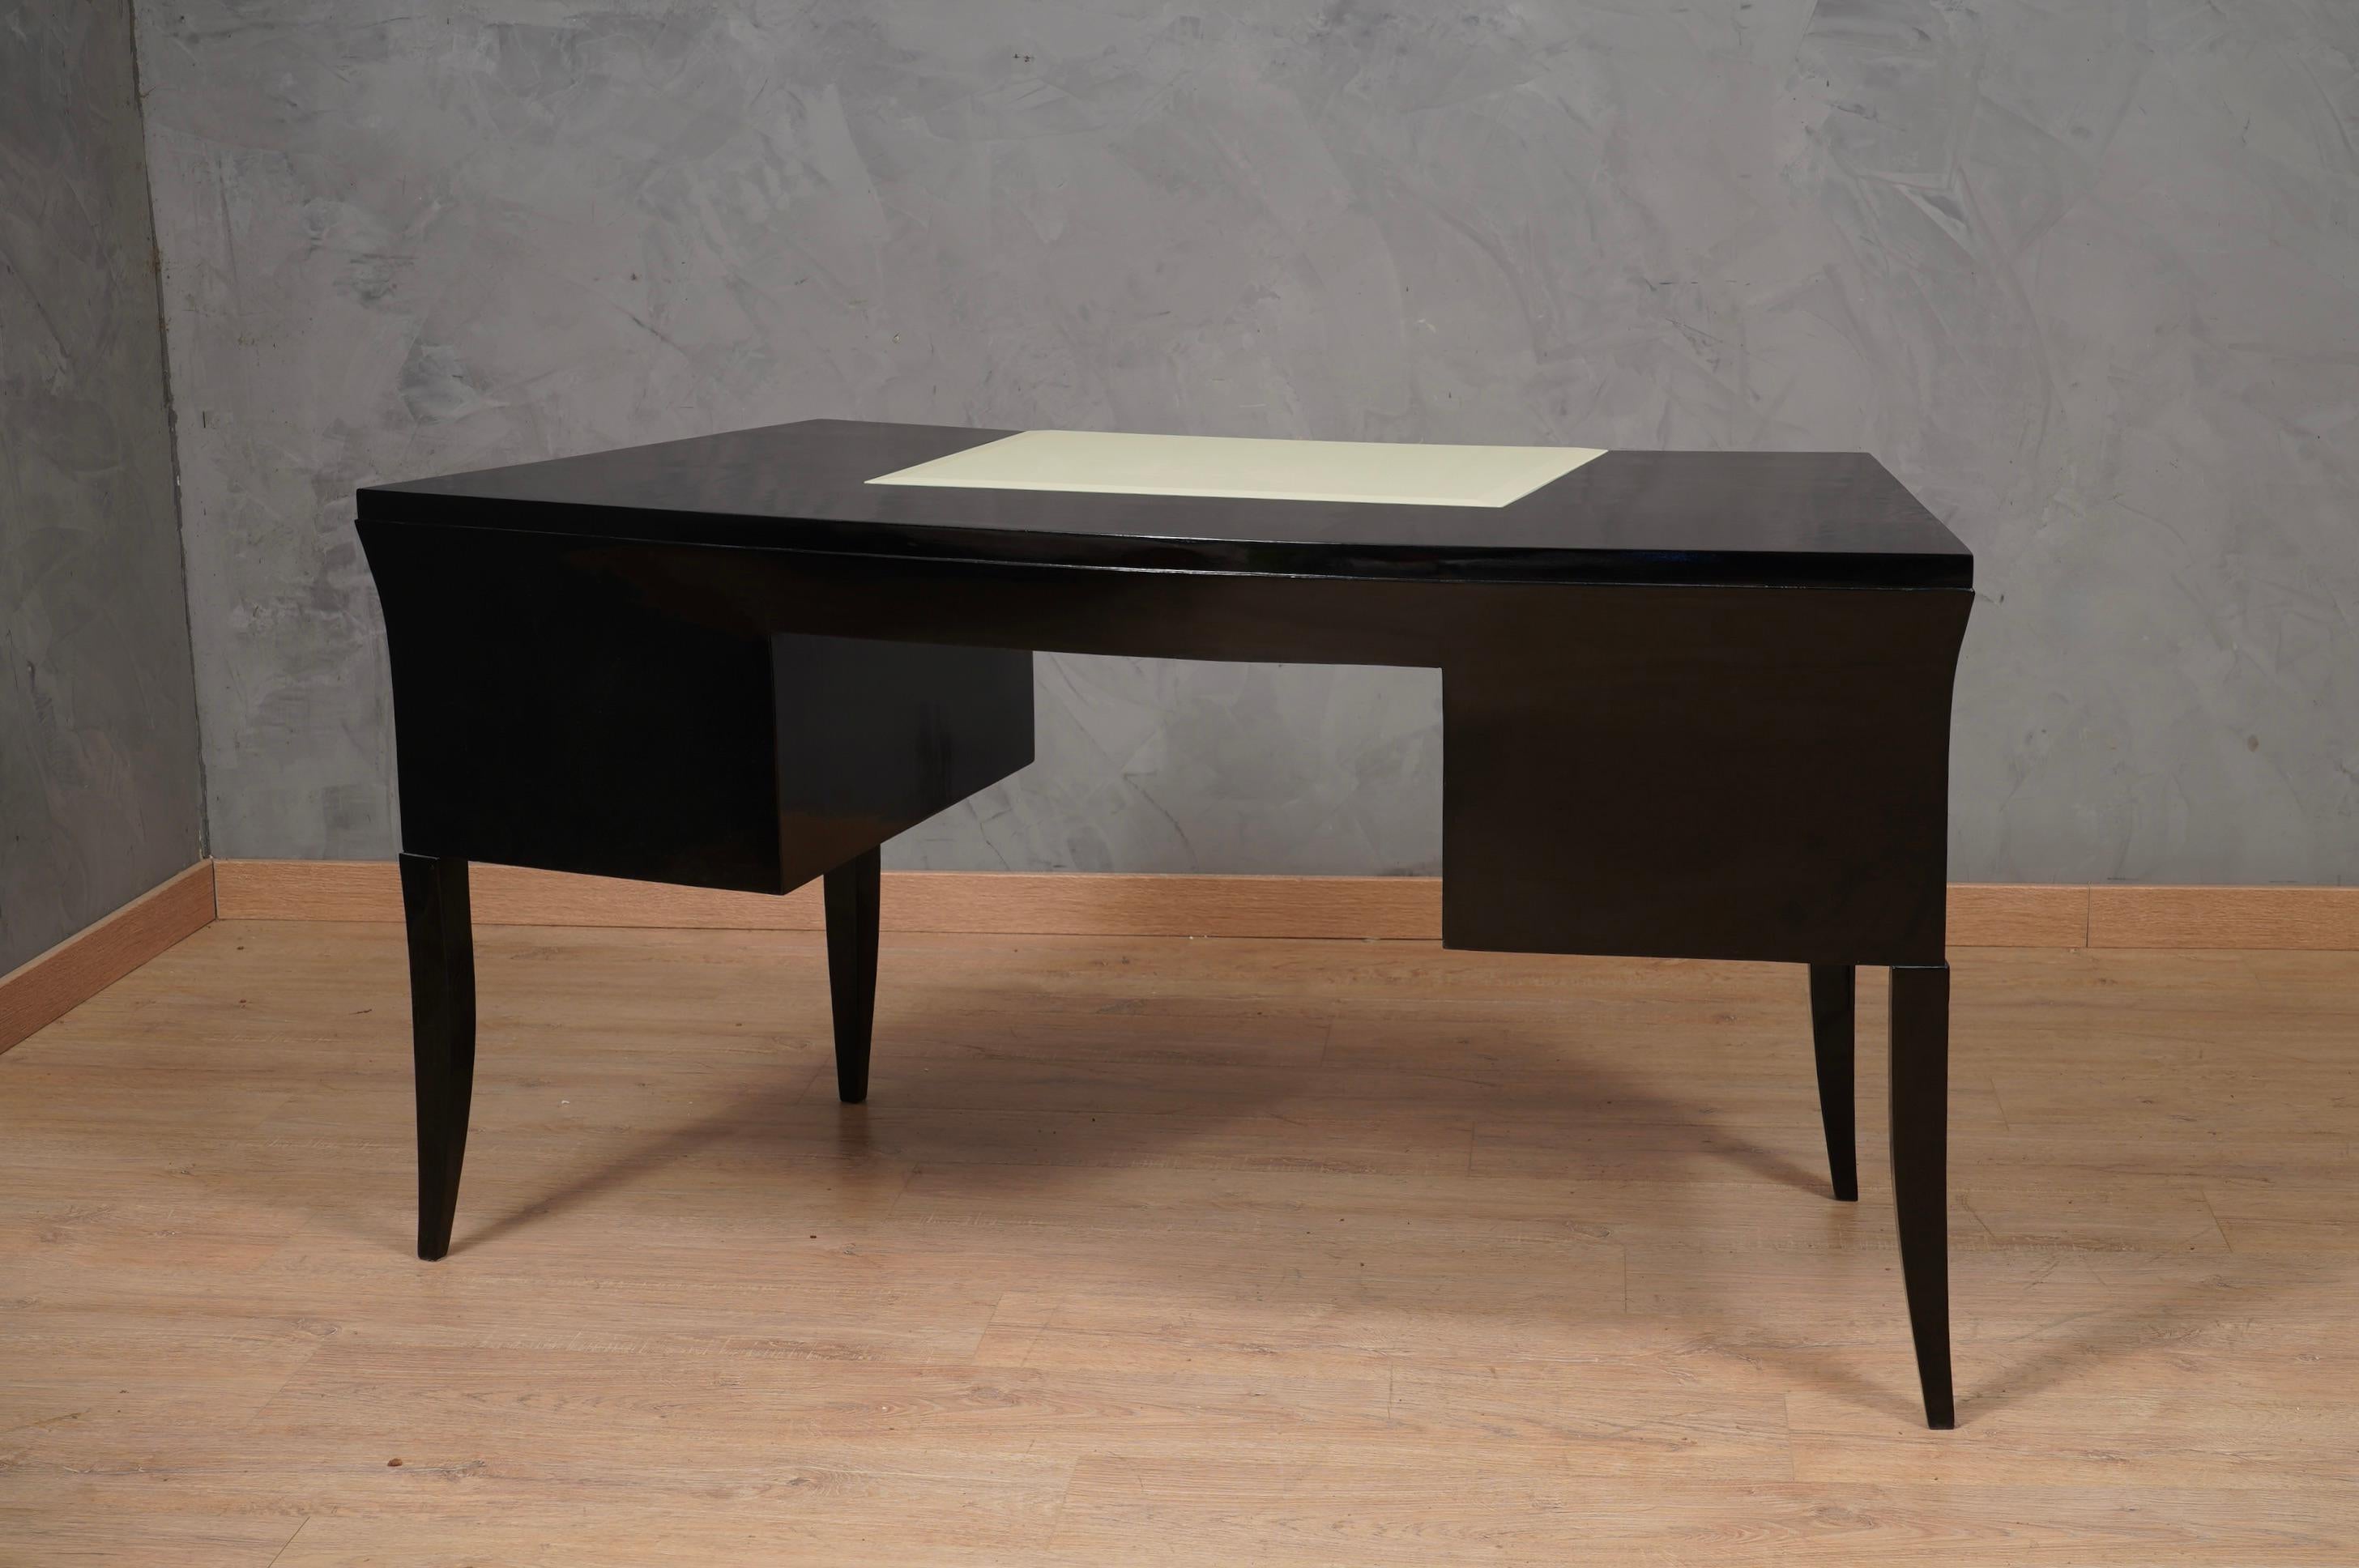 MidCentury Black and Creme Glass Desk, 1970 For Sale 5